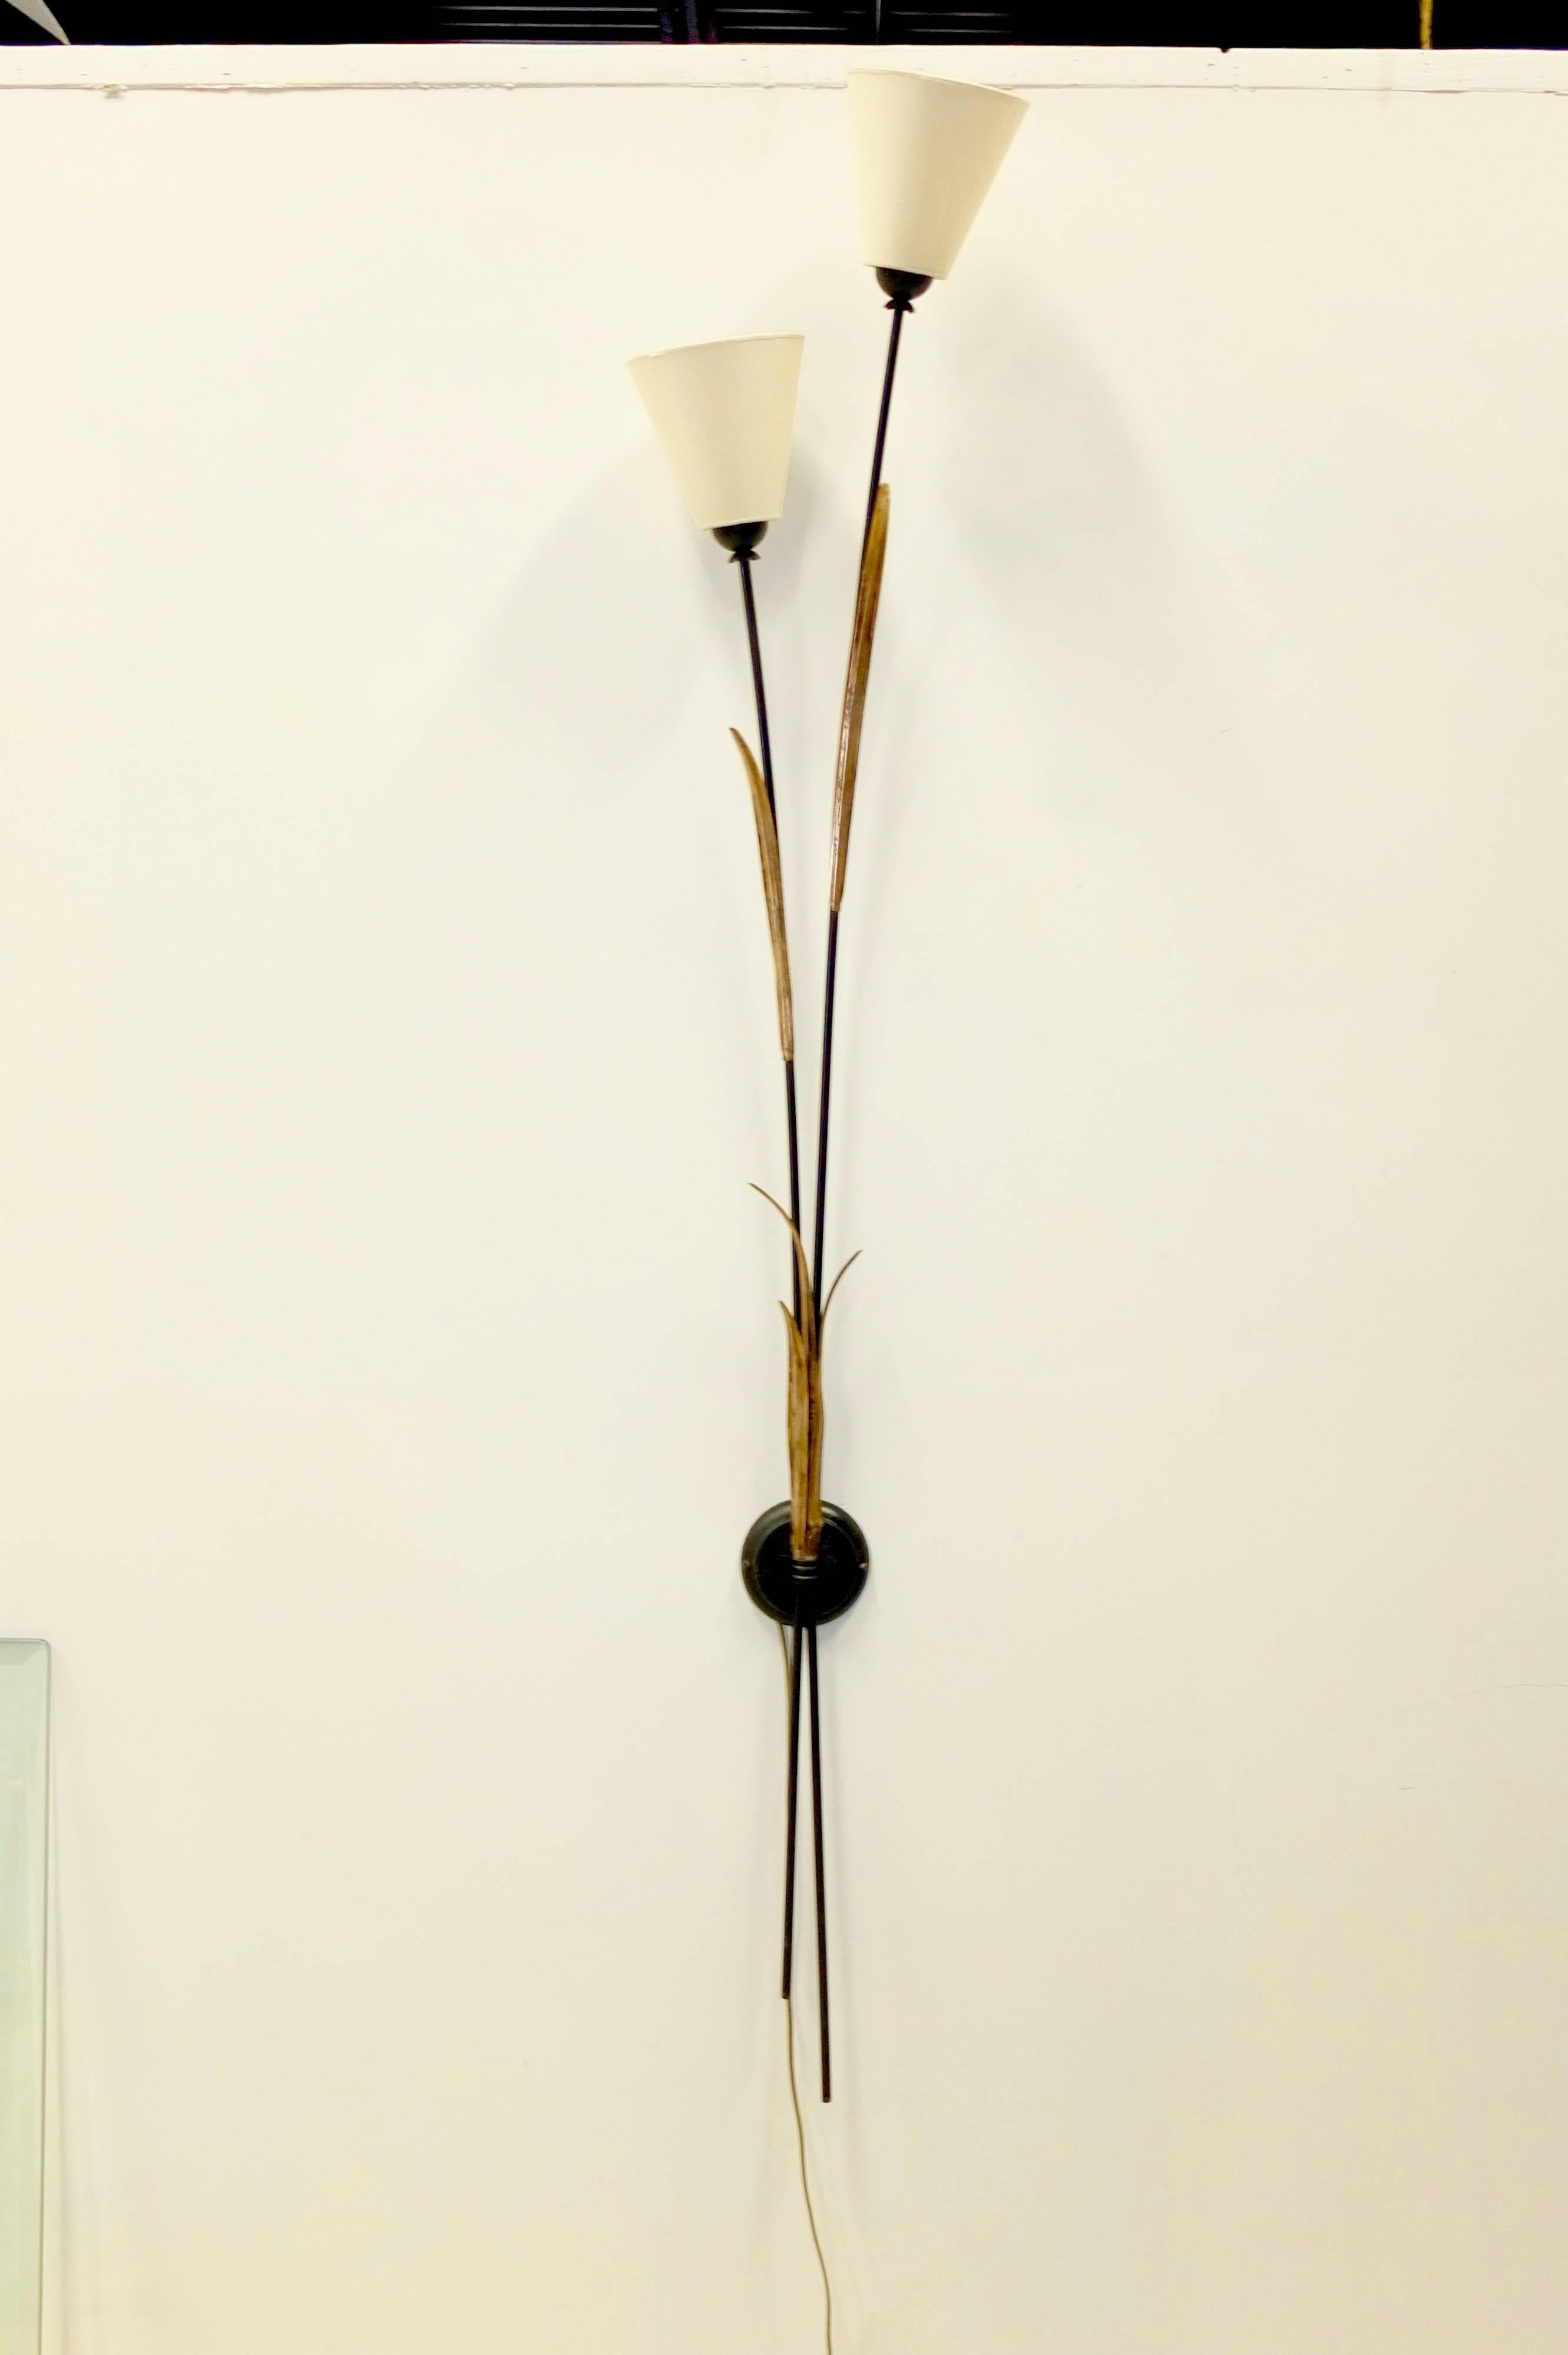 Original 1950's Italian wall mounted bracket sconce in the form of two long stalks of a flowering plant made of gilt and black enameled tole. 65 inches long not including the shades....69 inches with the shades.

Presently corded but can be